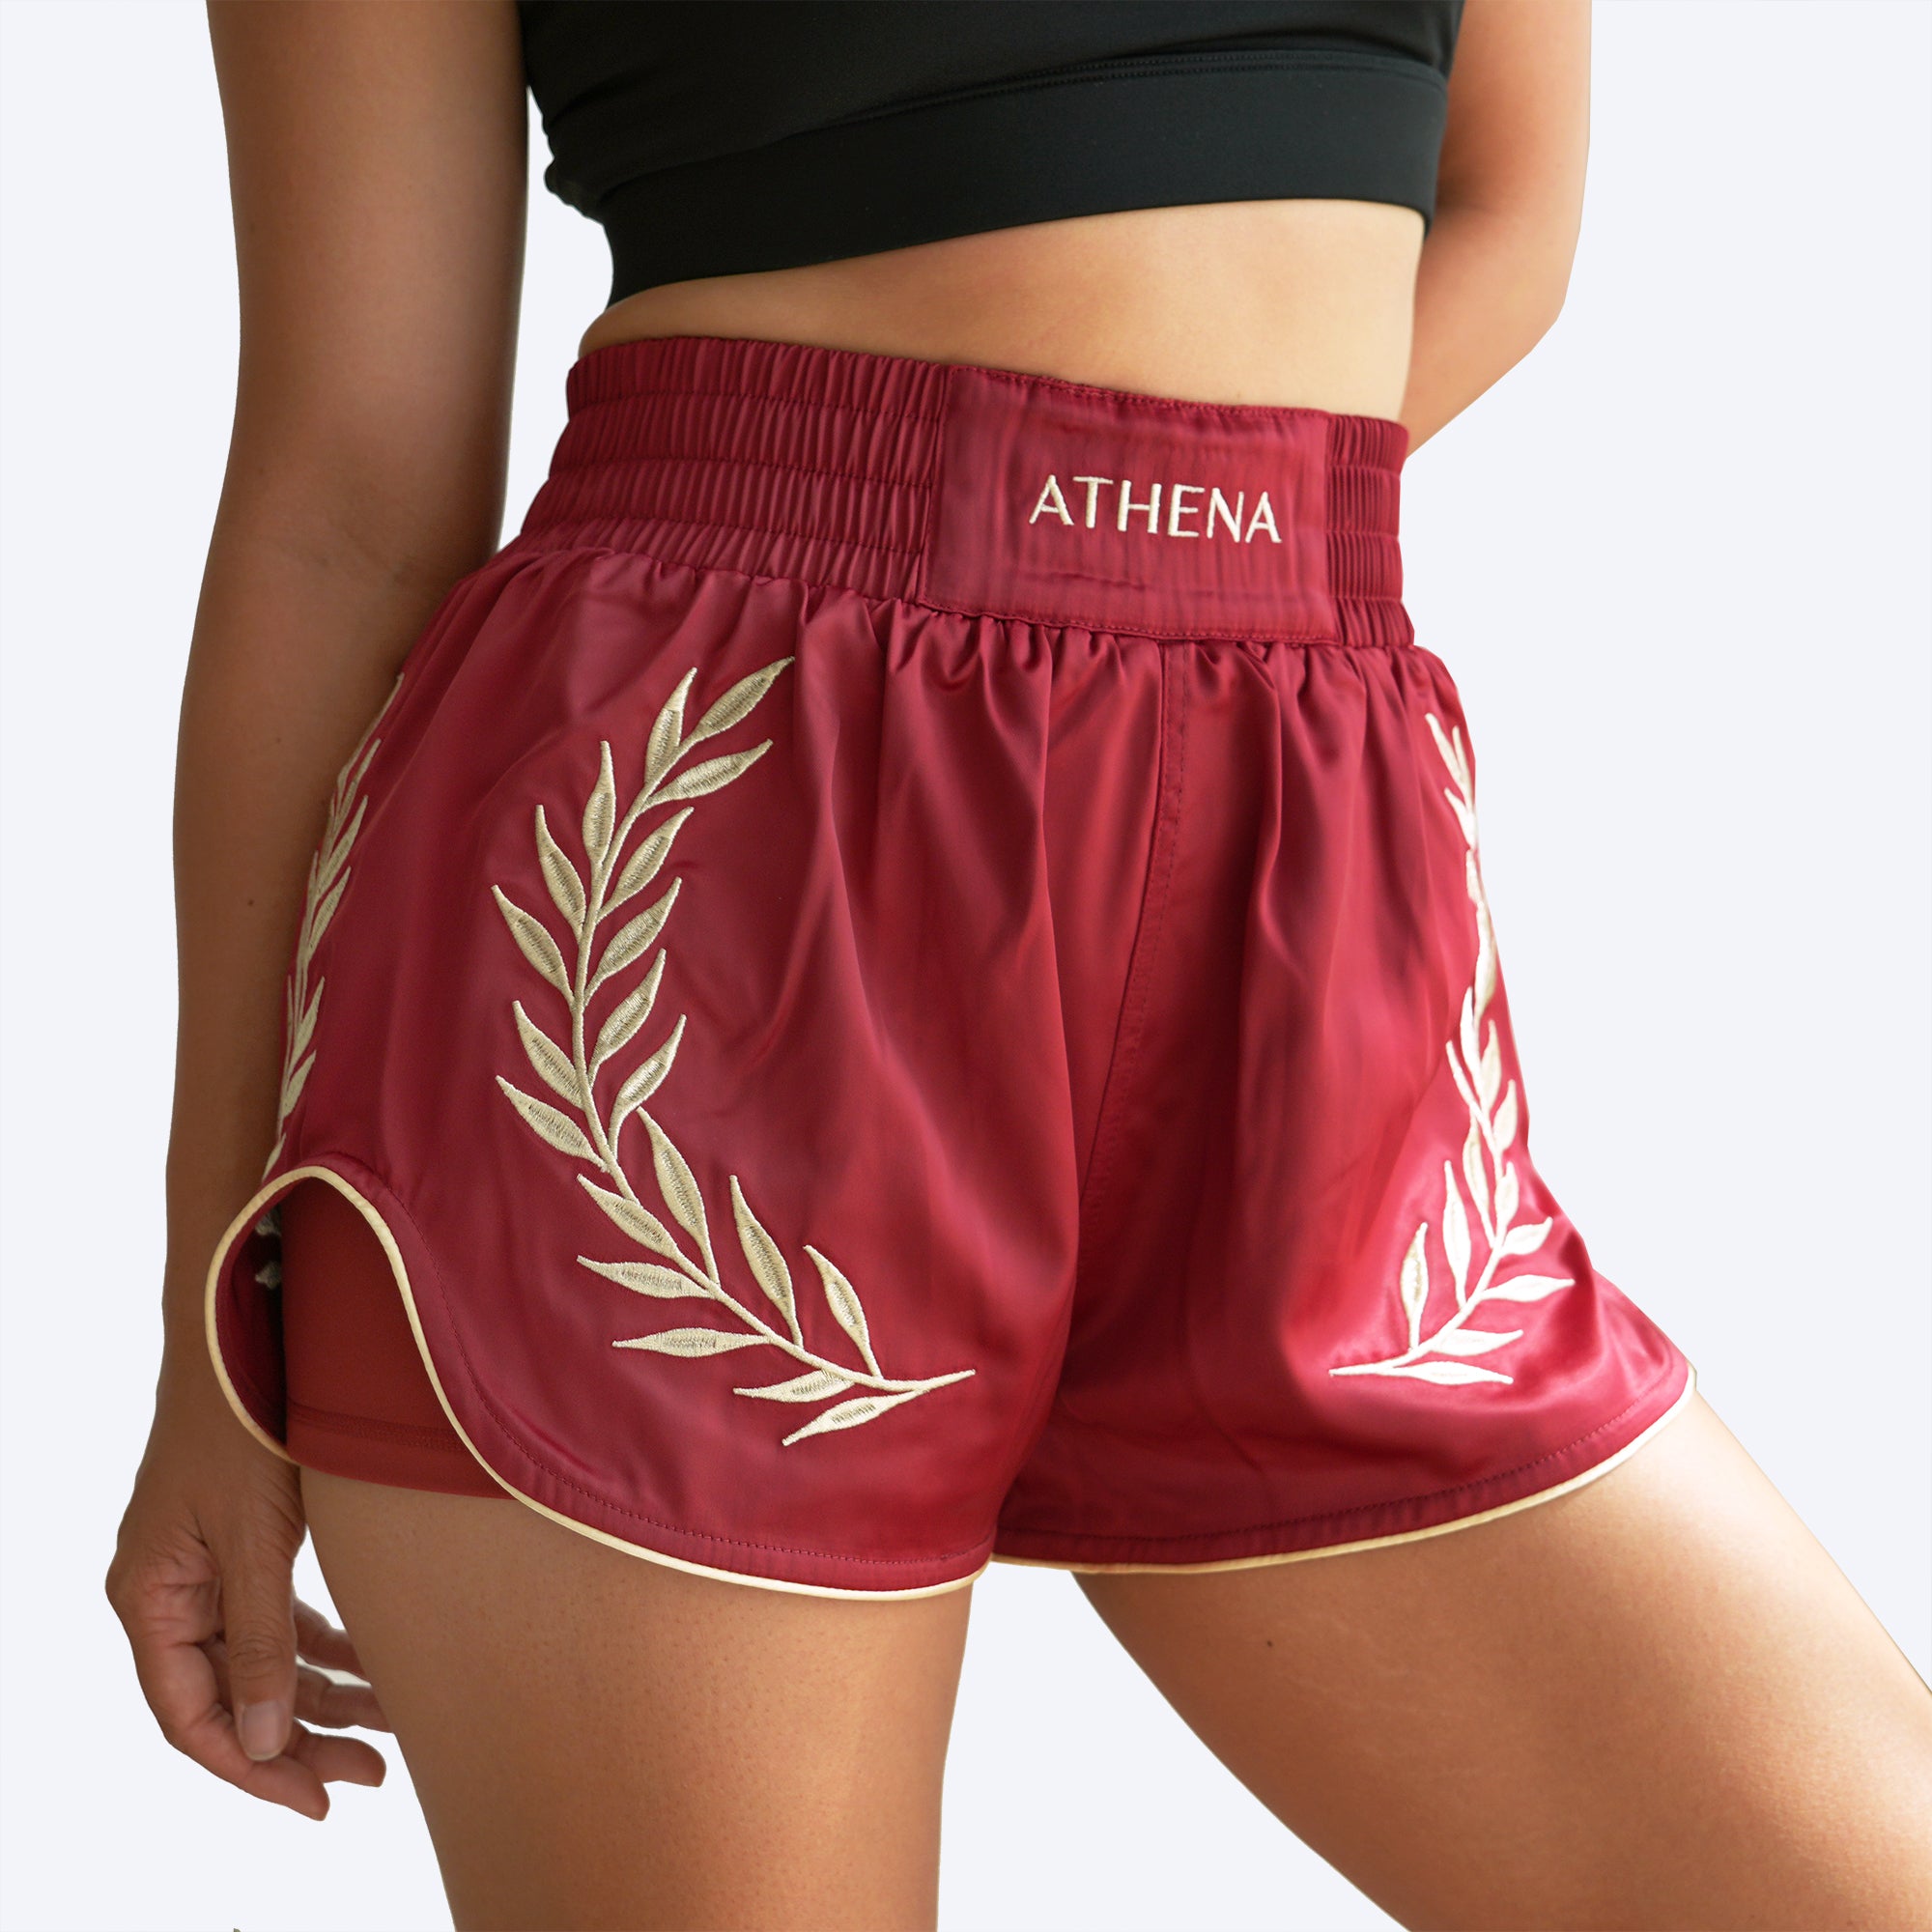 Athena Fightwear women's muay thai shorts crimson red gold with wide hips and built in safety shorts with anti camel toe anti ride up and pockets